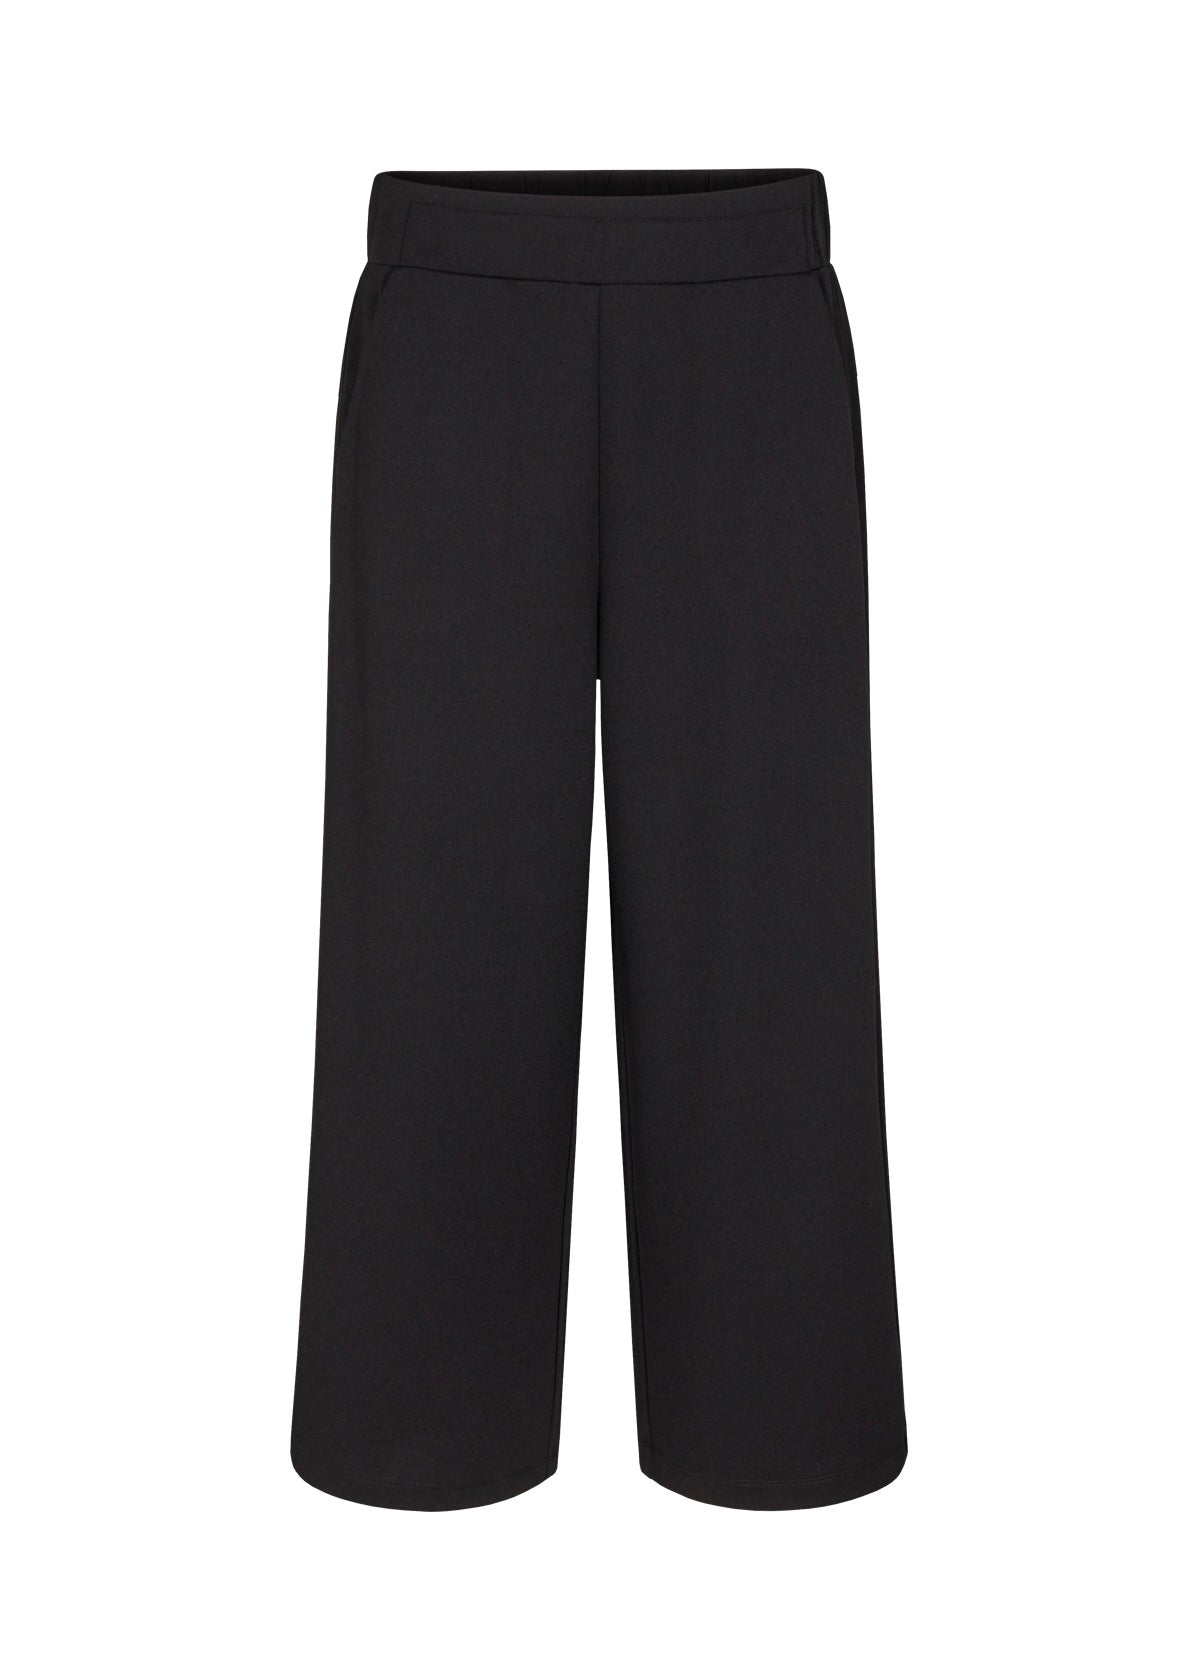 Soyaconcept - Siham Trousers / Black